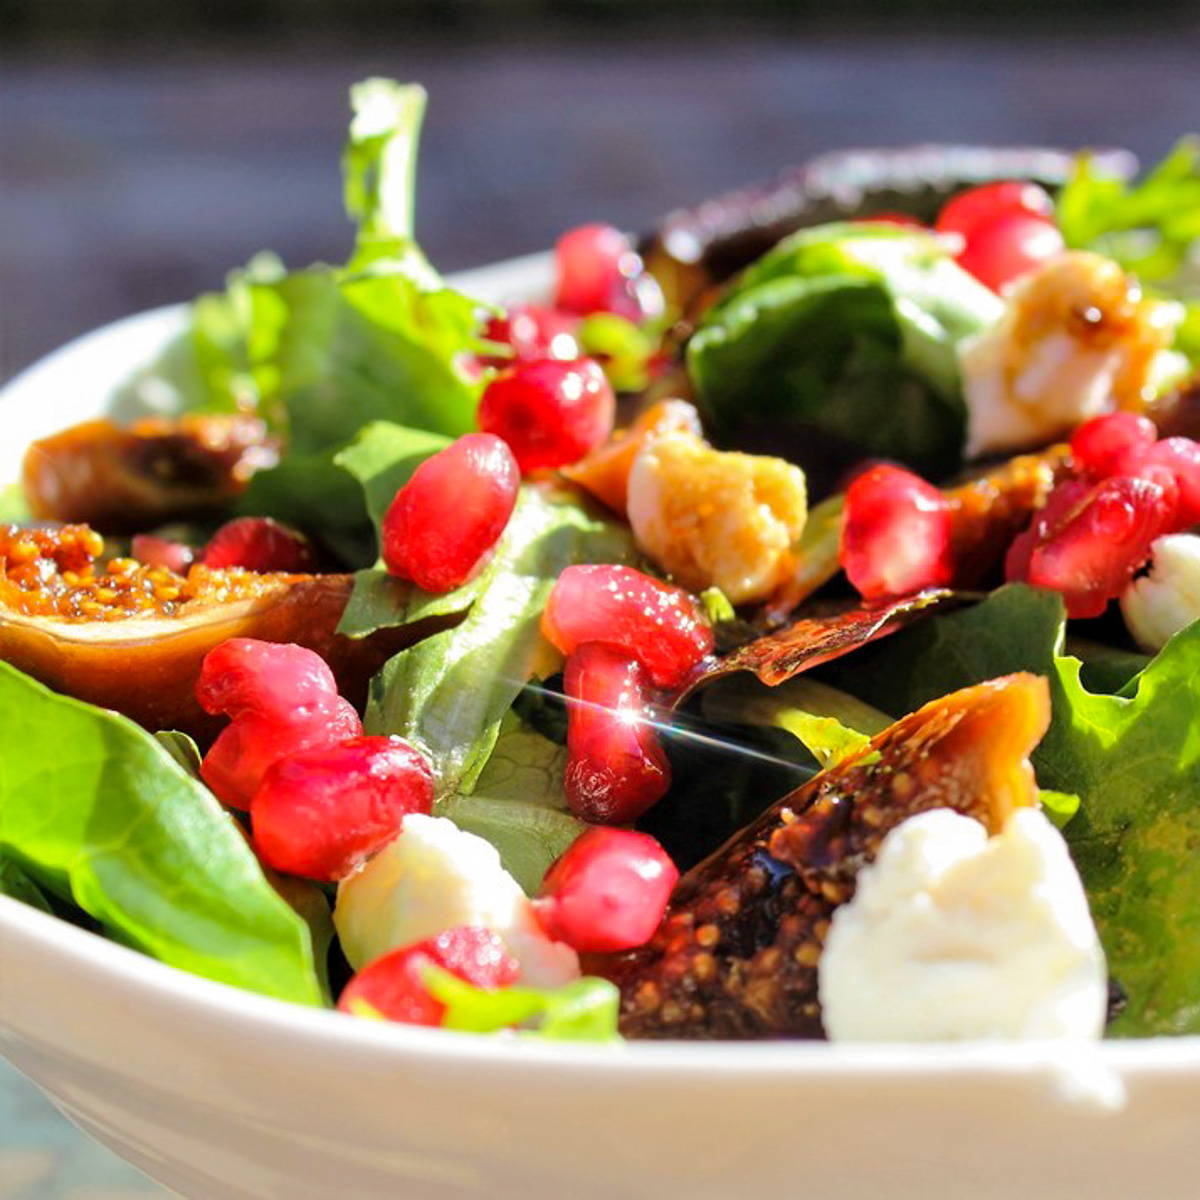 Fig Salad with Pomegranate Seeds & Balsamic Dressing